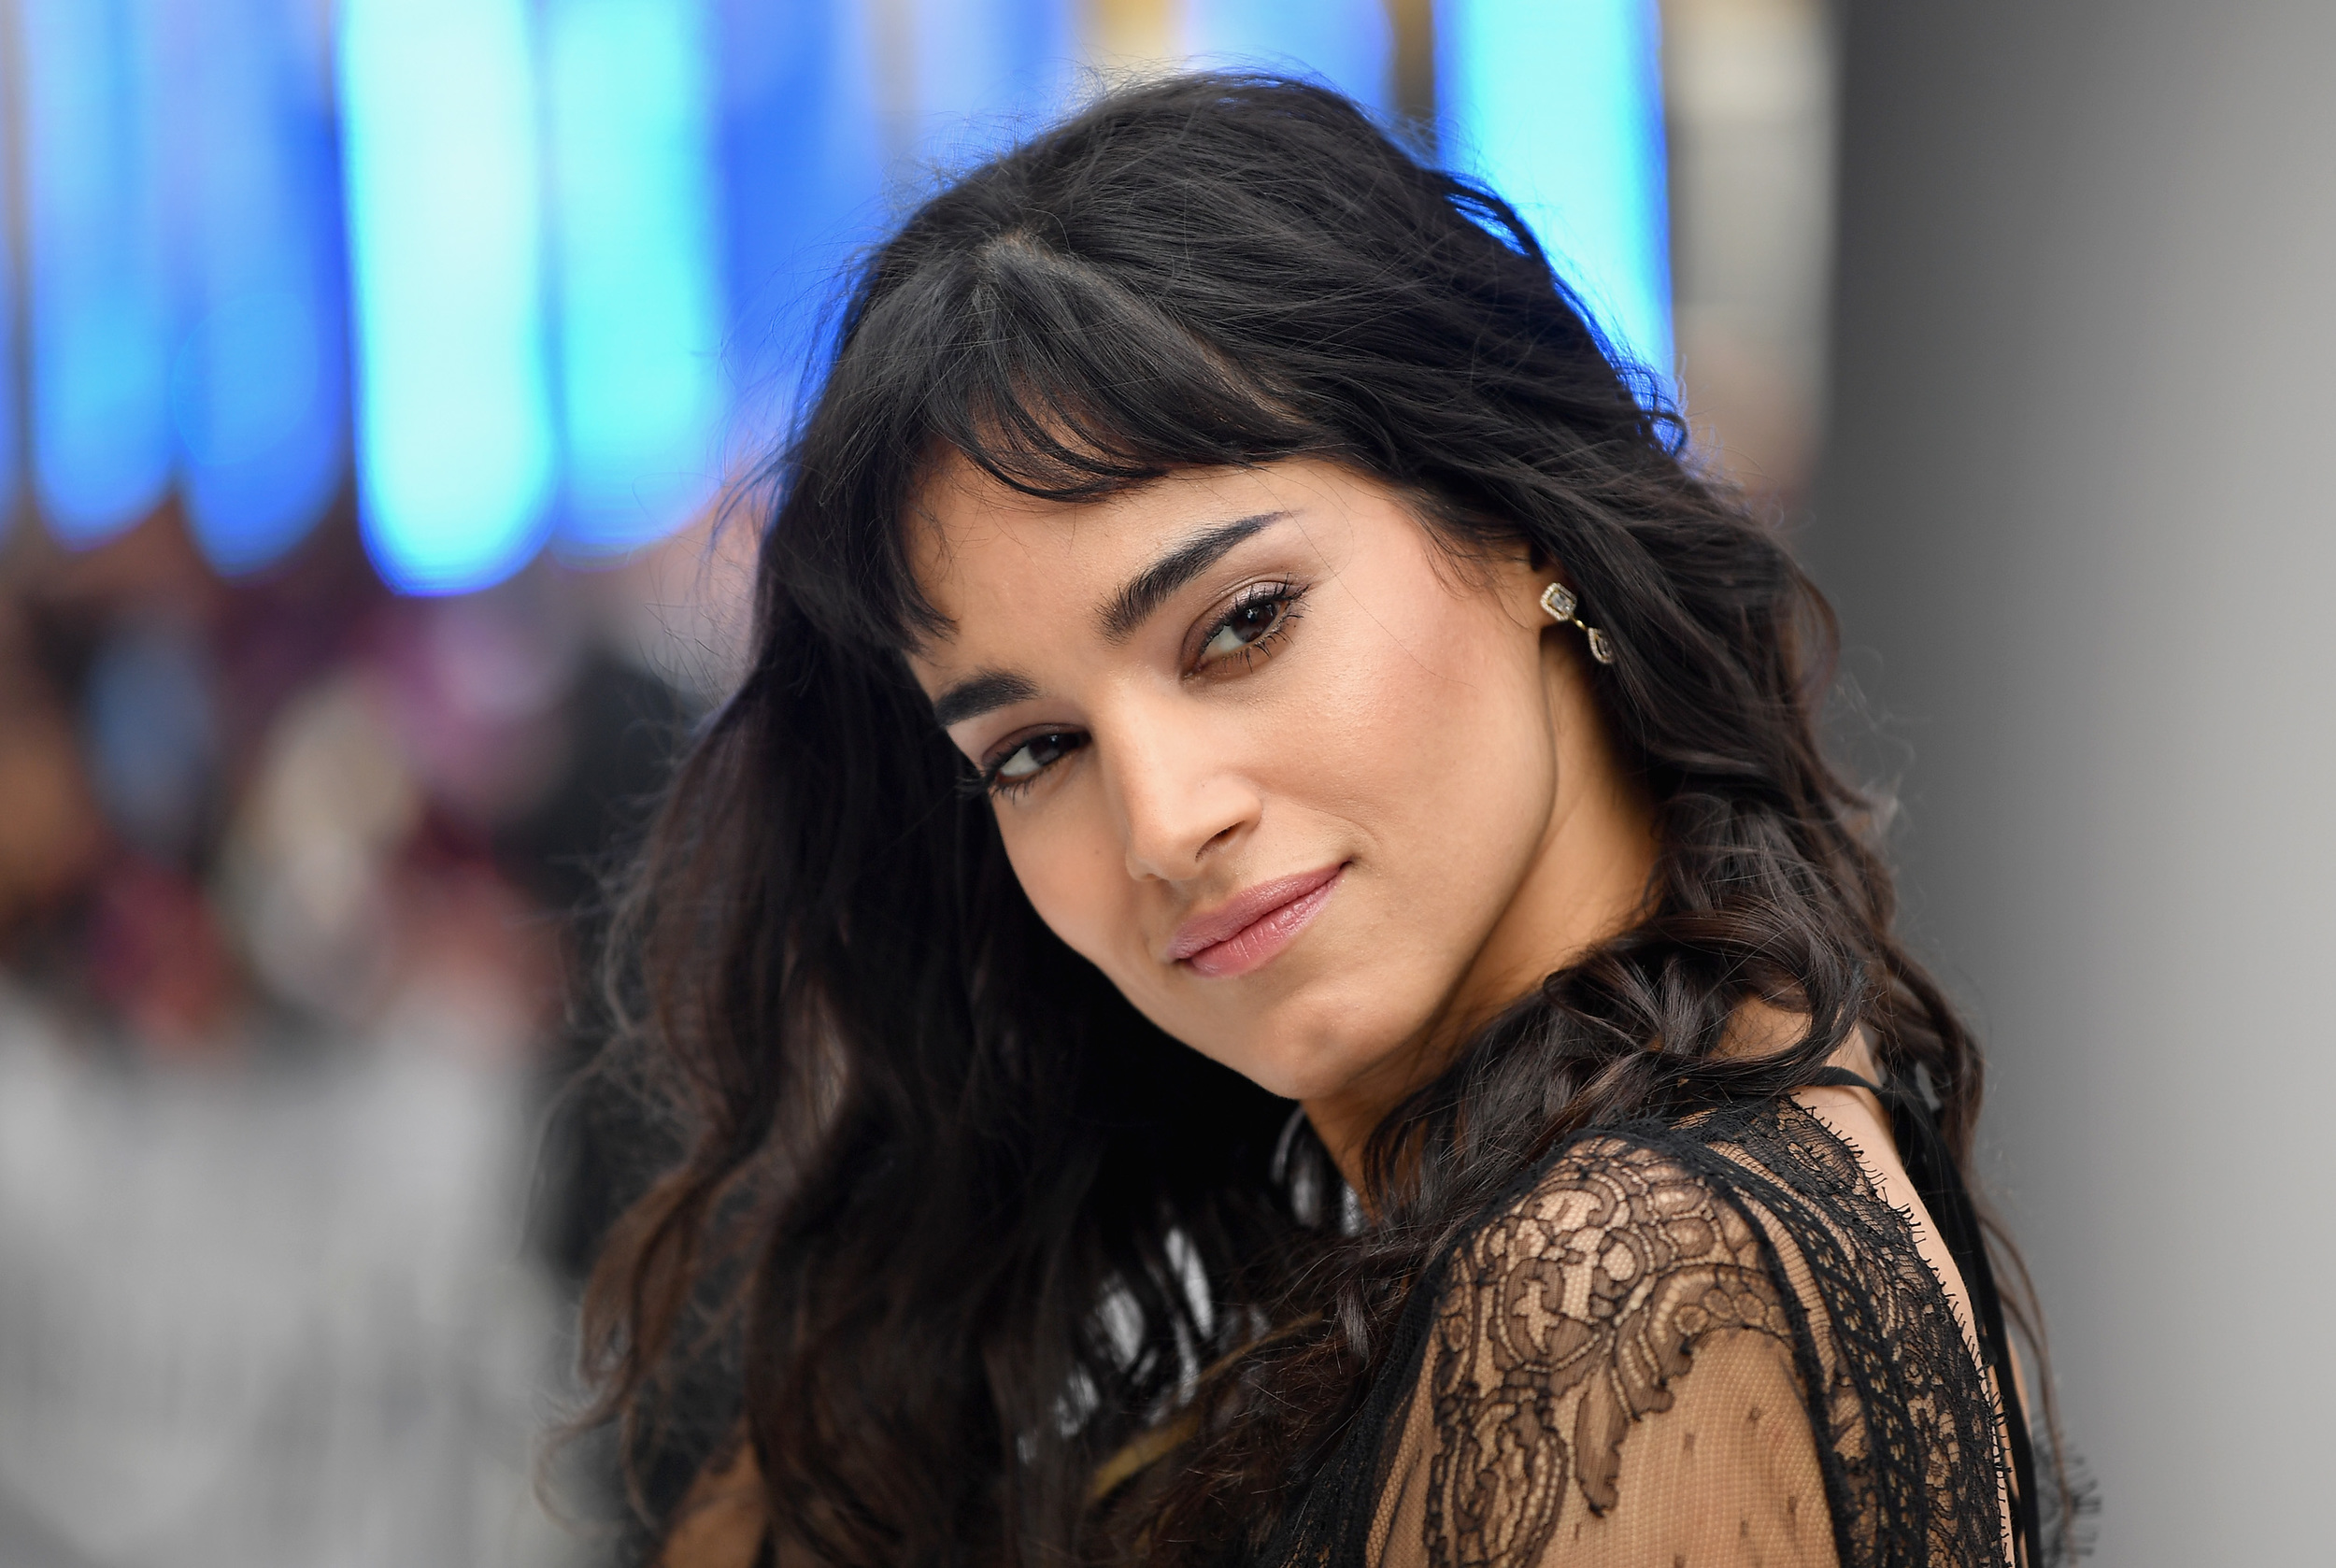  LONDON, ENGLAND - JULY 12:  Sofia Boutella attends the UK Premiere of Paramount Pictures "Star Trek Beyond" at the Empire Leicester Square on July 12, 2016 in London, England.  (Photo by Gareth Cattermole/Getty Images for Paramount Pictures) *** Loc